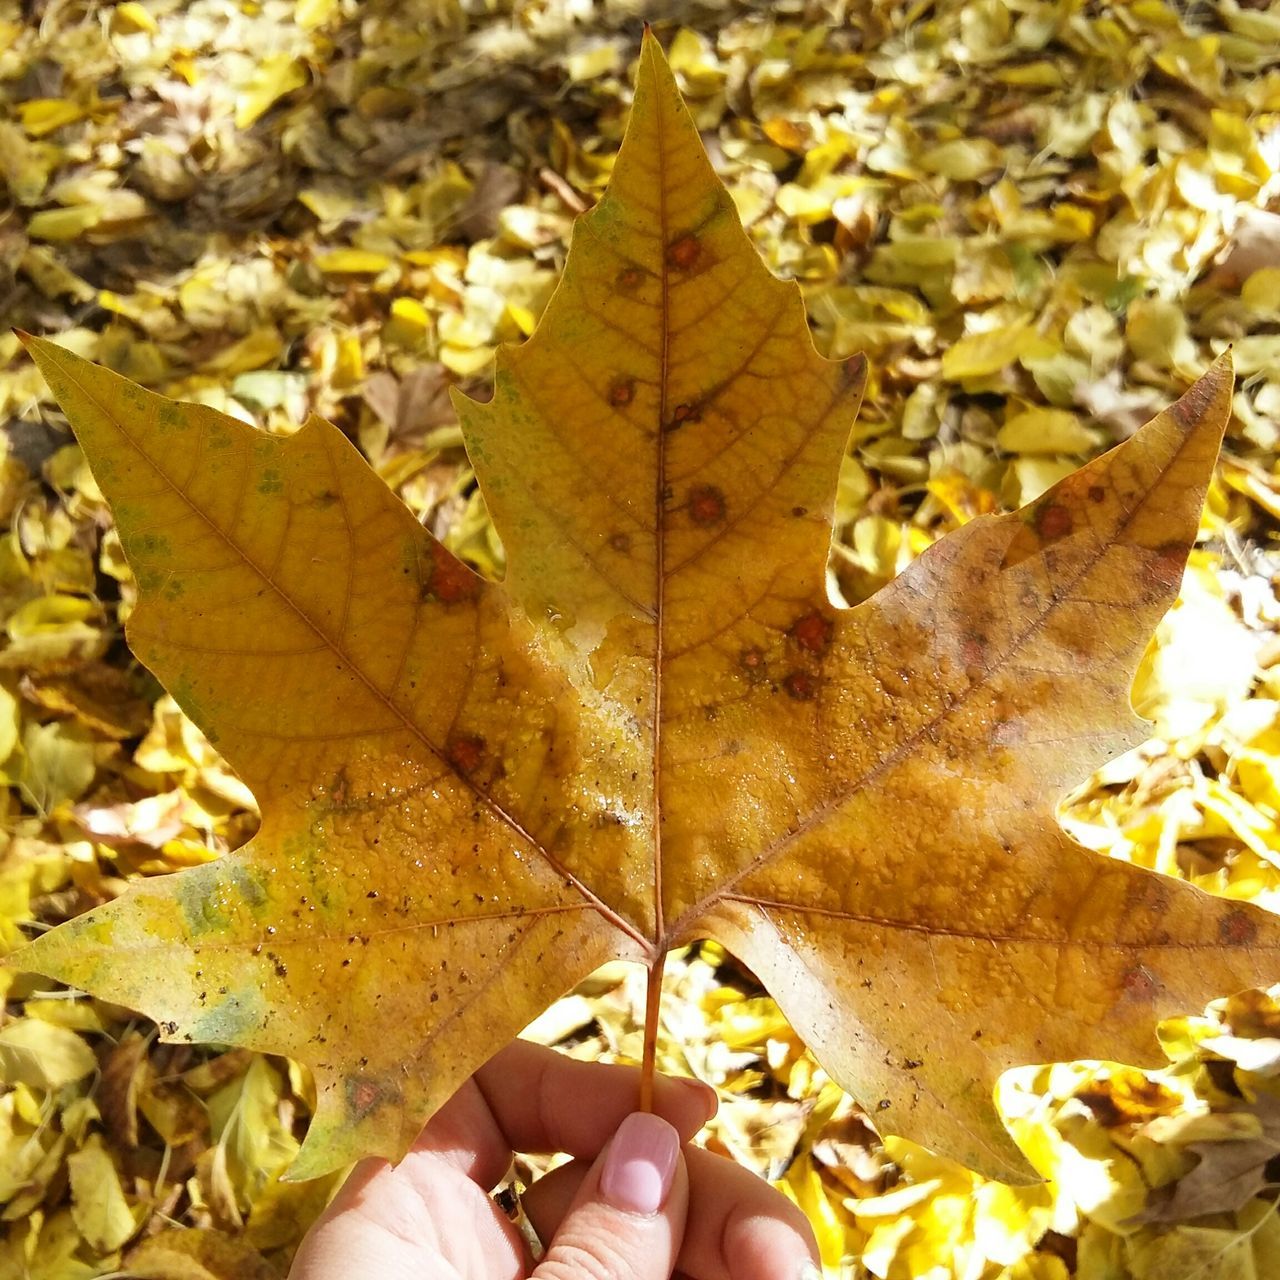 leaf, autumn, personal perspective, change, leaves, season, dry, part of, low section, person, leaf vein, unrecognizable person, maple leaf, nature, fallen, lifestyles